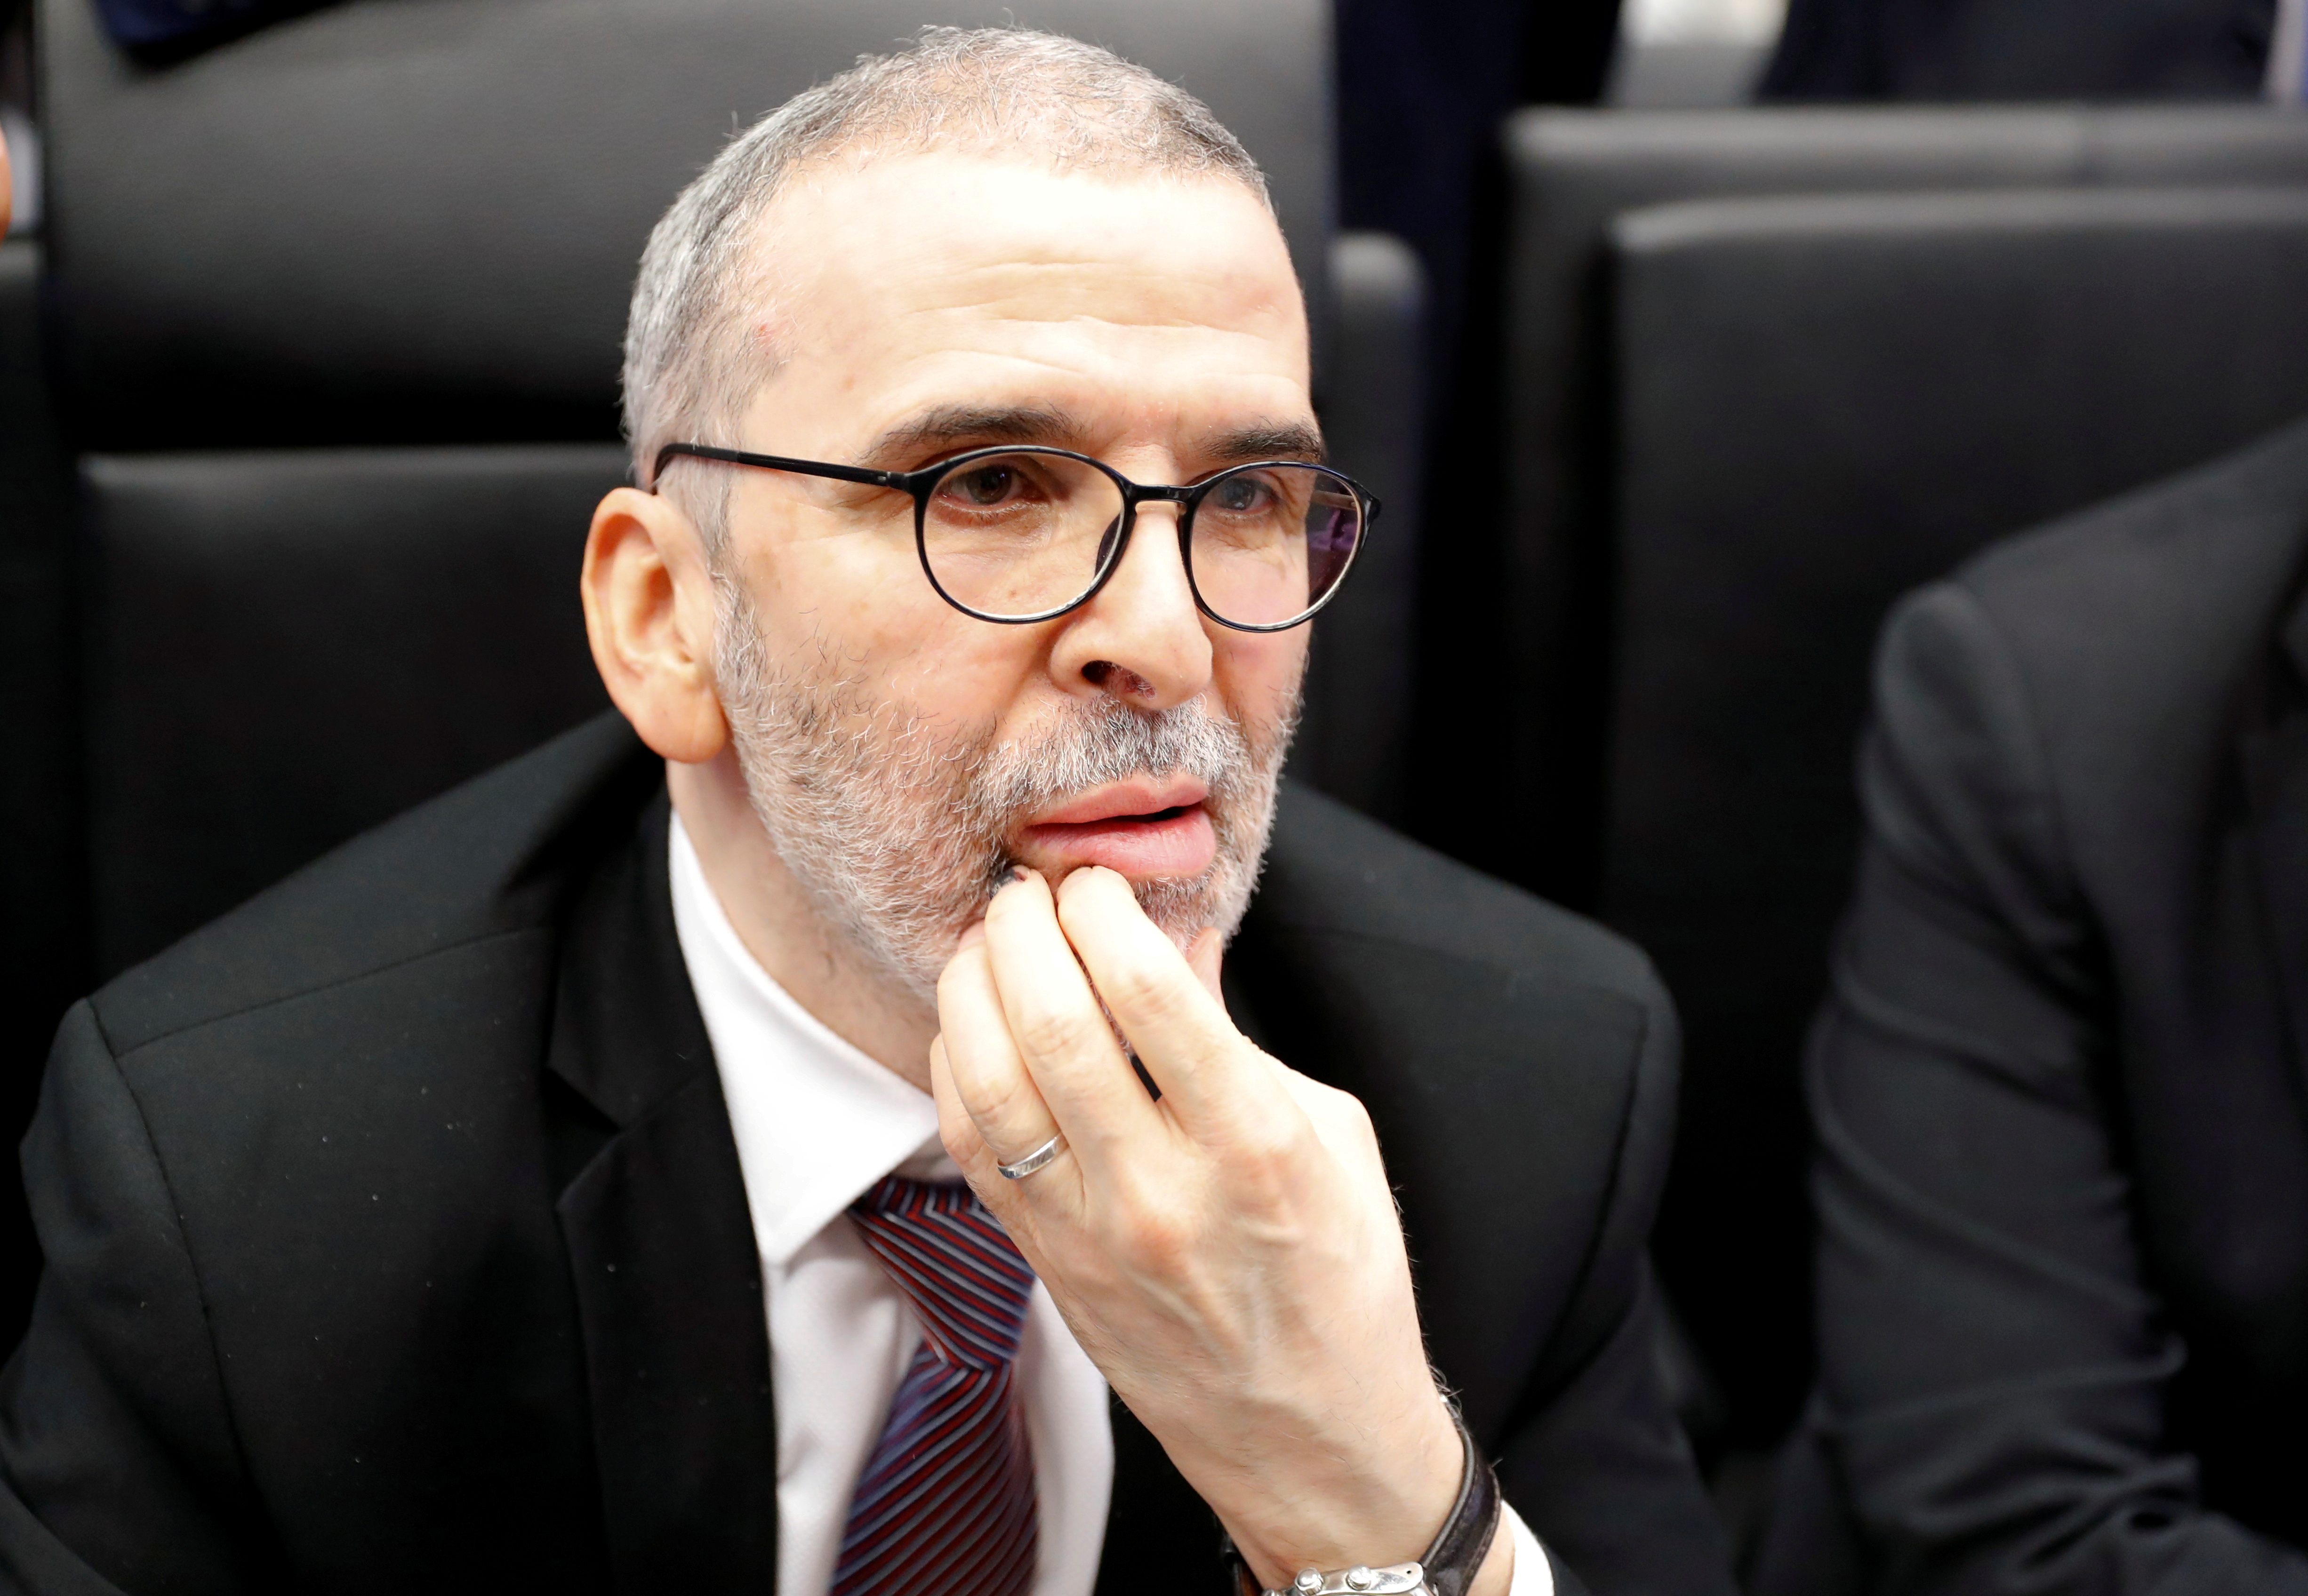 Chairman of Libya's state oil firm National Oil Corporation (NOC) Mustafa Sanalla talks to journalists at the beginning of an OPEC meeting in Vienna, Austria, July 1, 2019.  REUTERS/Leonhard Foeger/File Photo